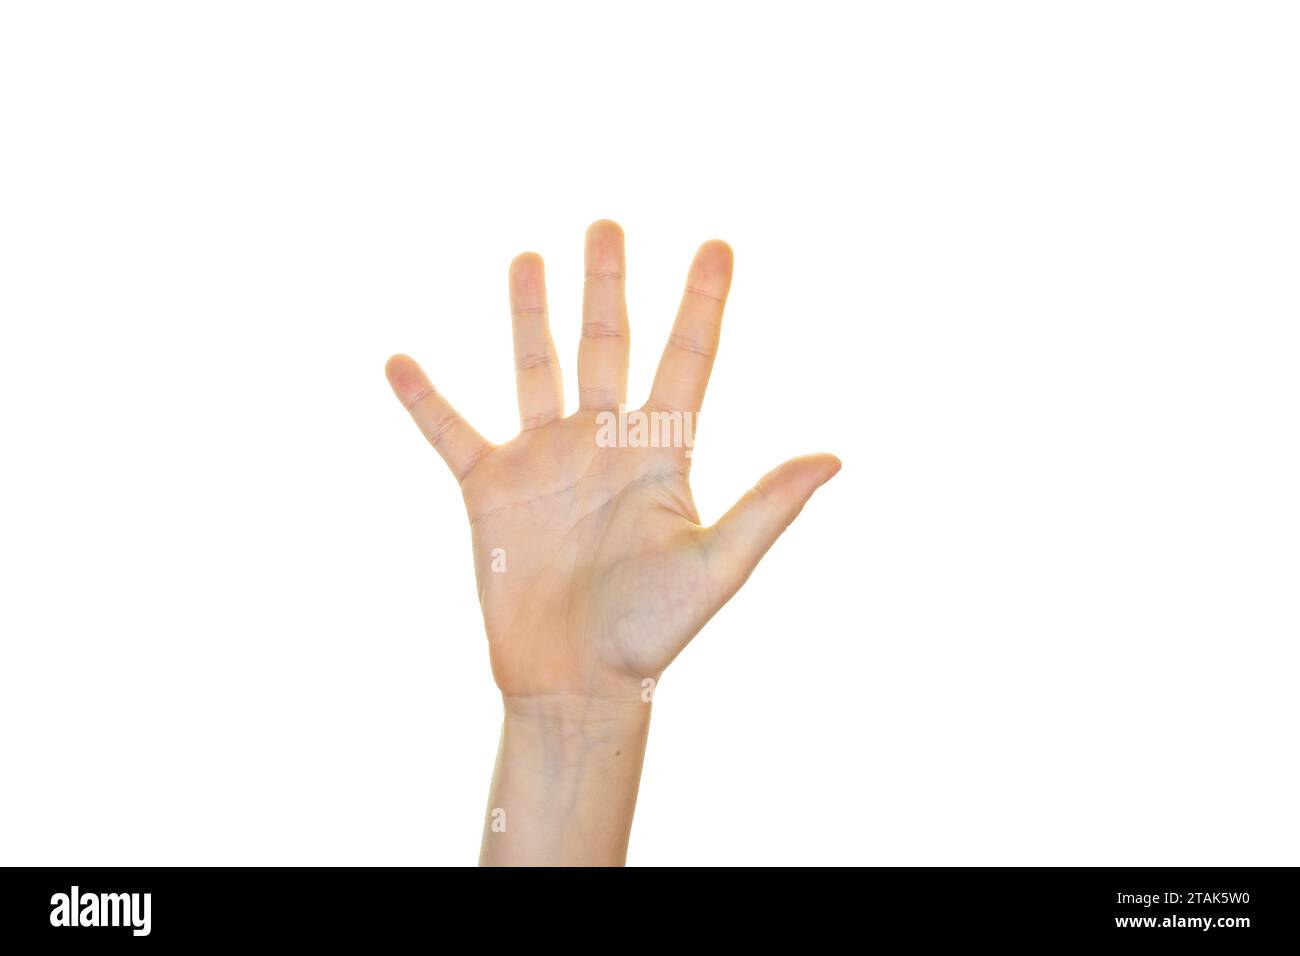 A hand showing numbers, isolated on a white background Stock Photo